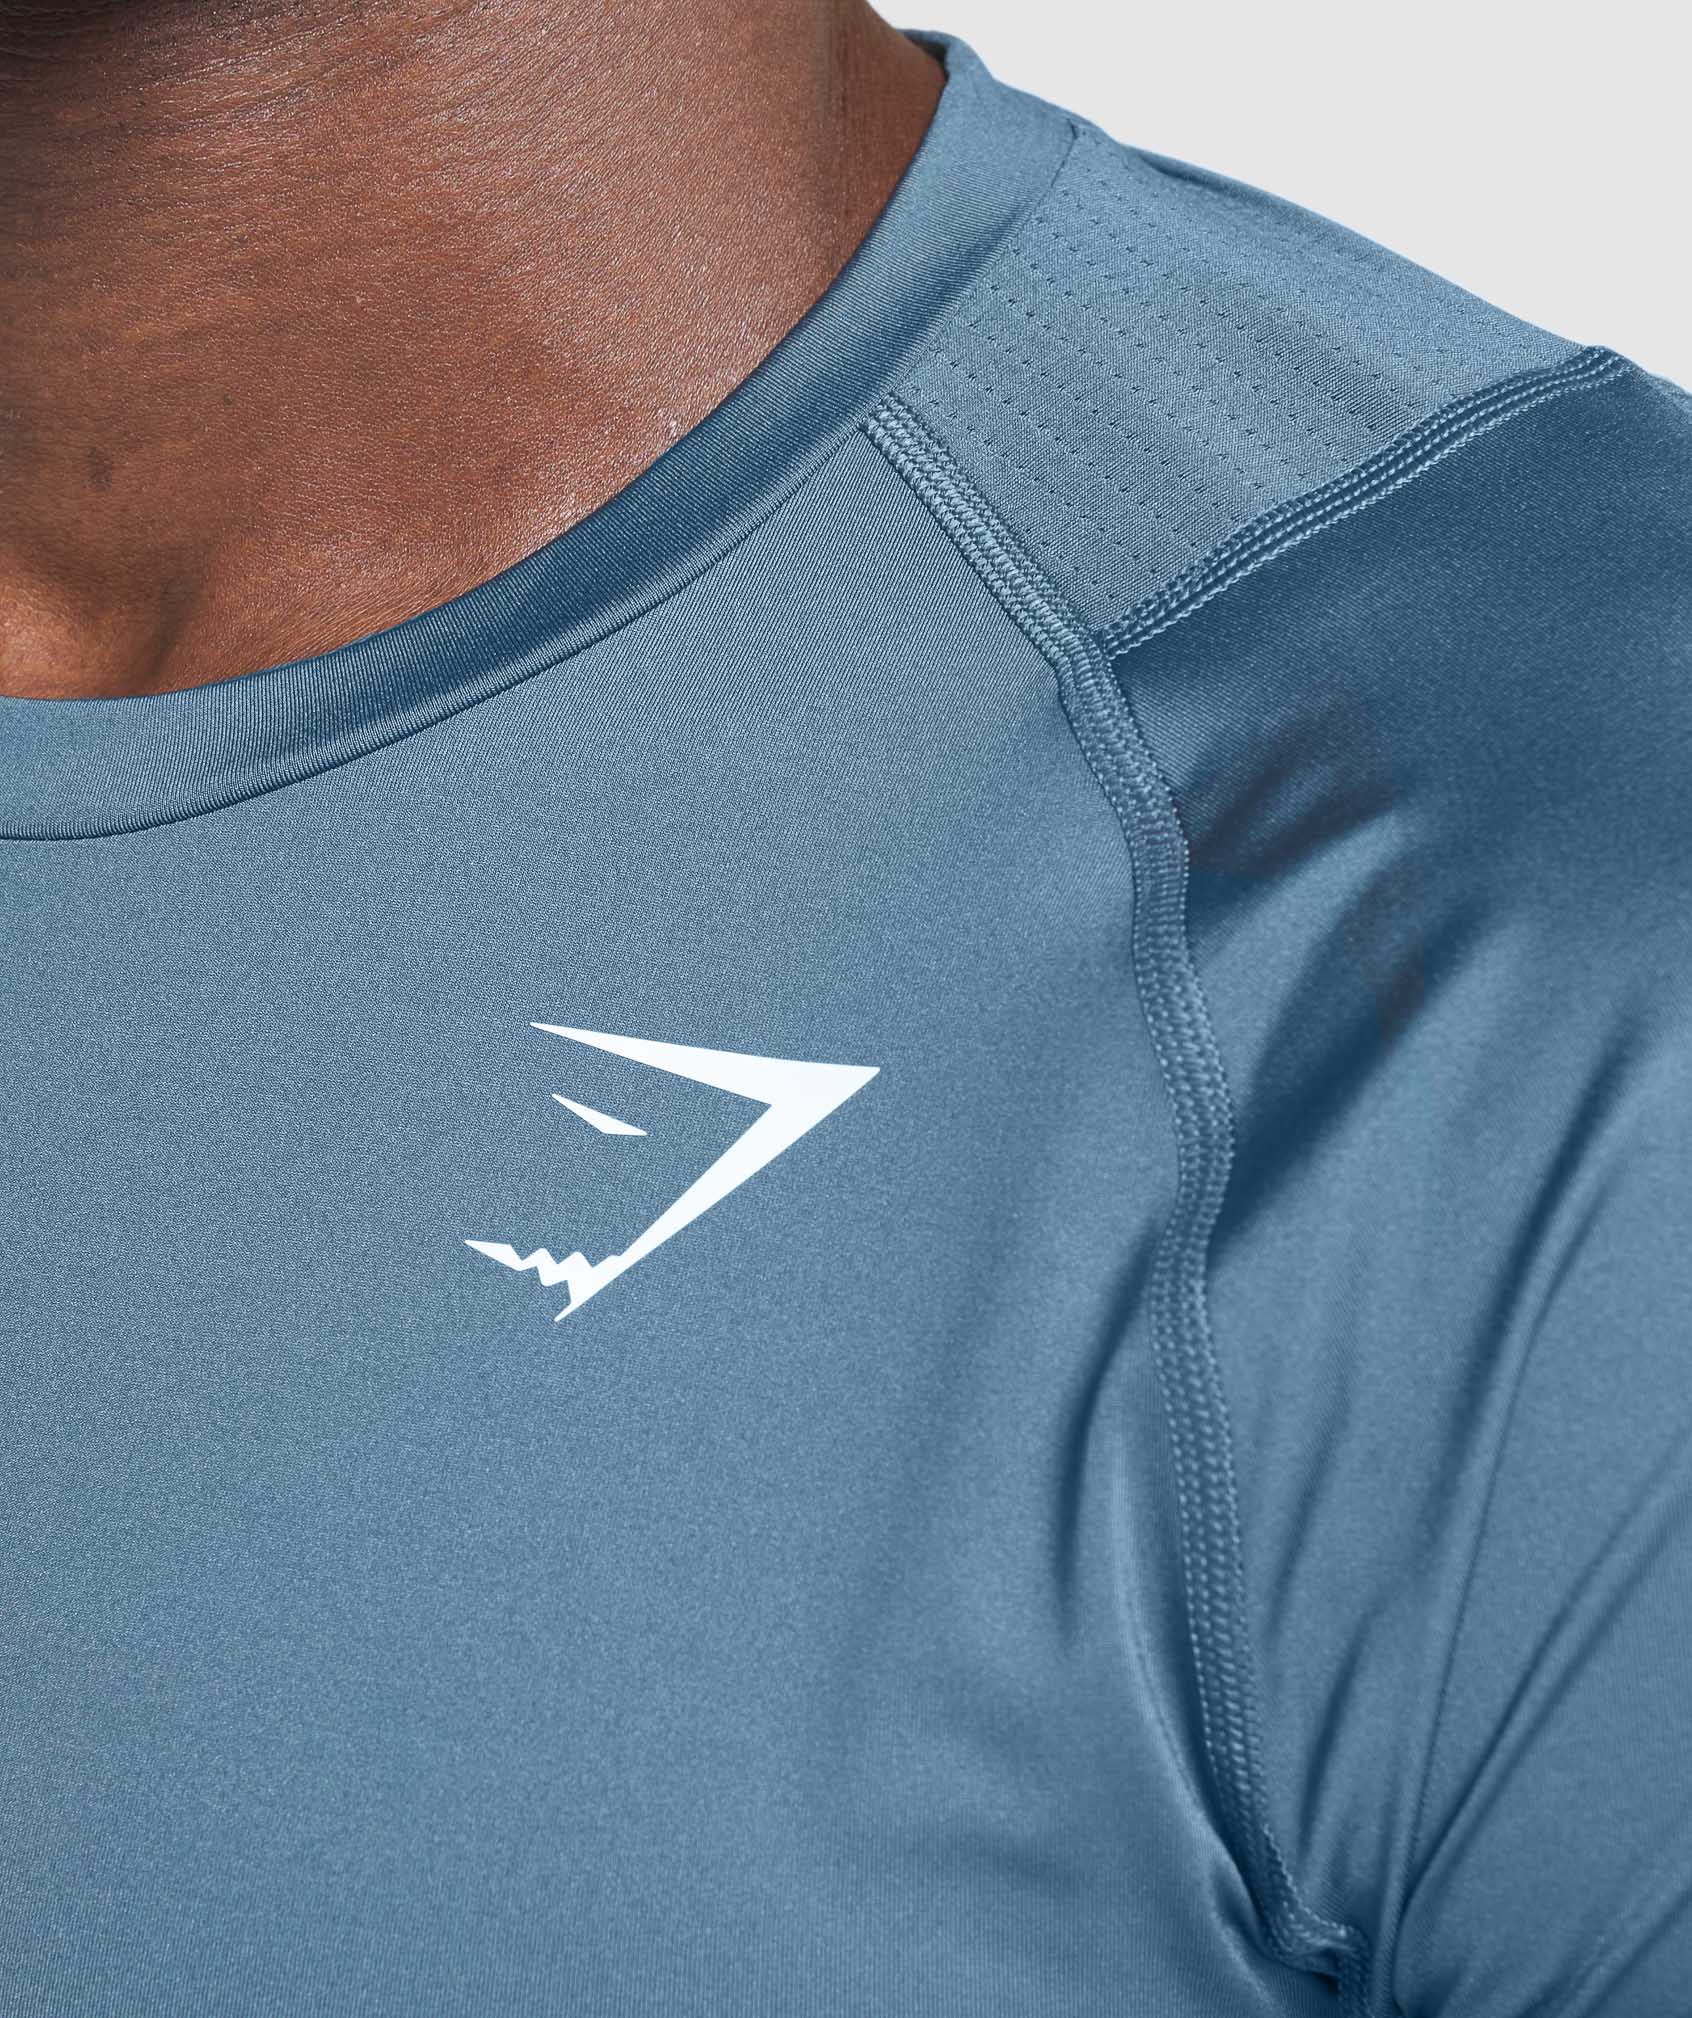 Element Baselayer T-Shirt in Teal - view 7